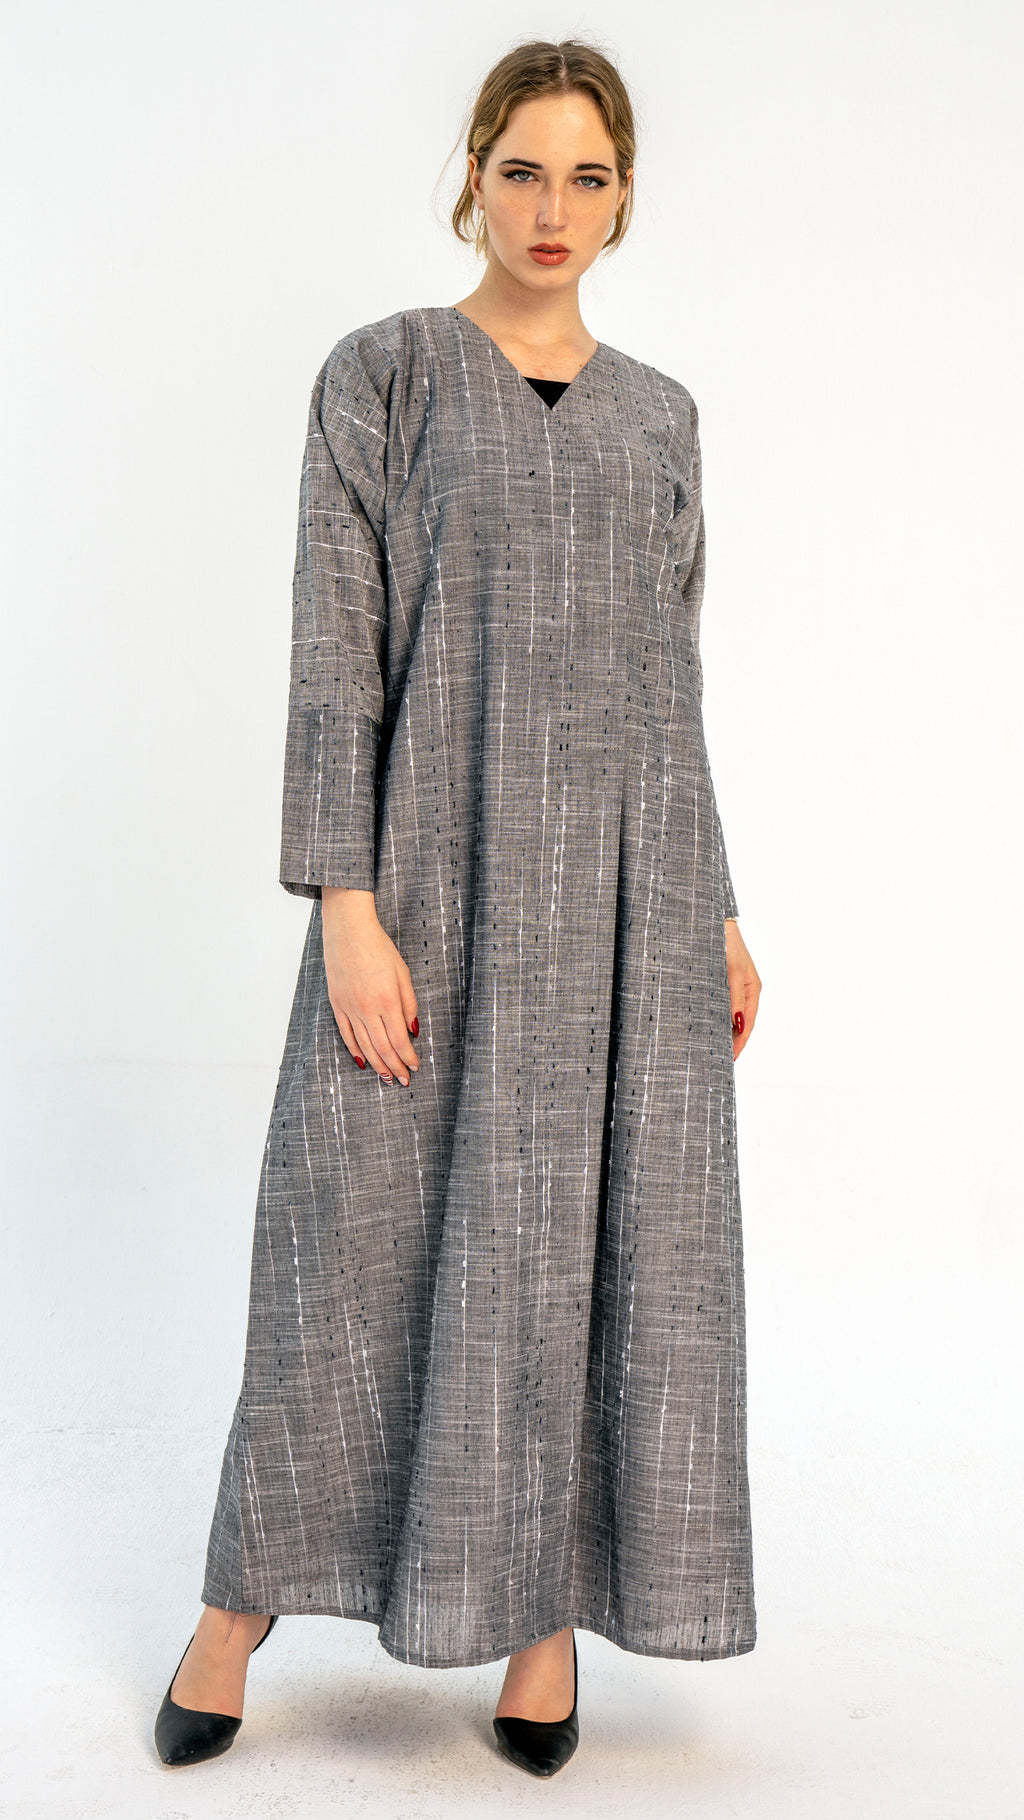 Grey Stripe Linen Overlap Abaya with Cut Joined Sleeve Pattern